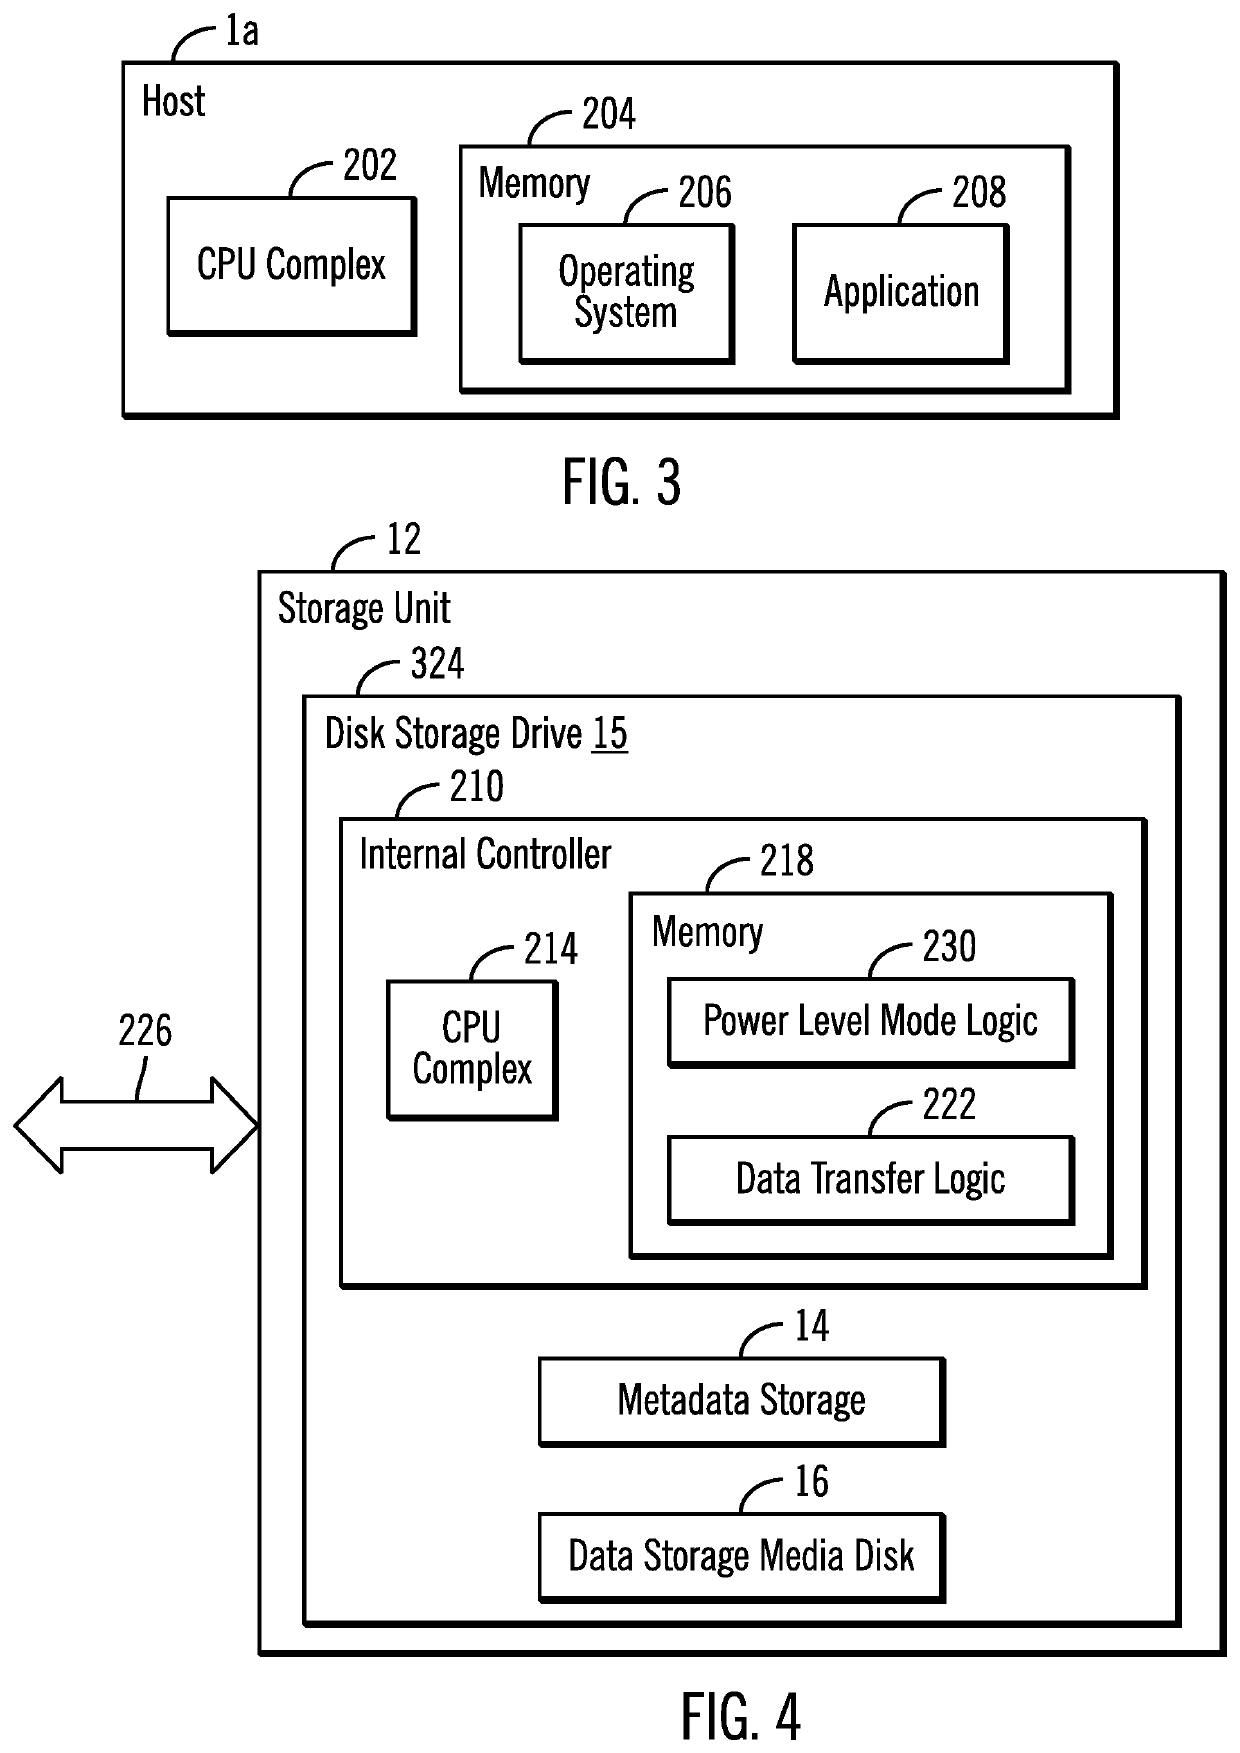 Power level management in a data storage system